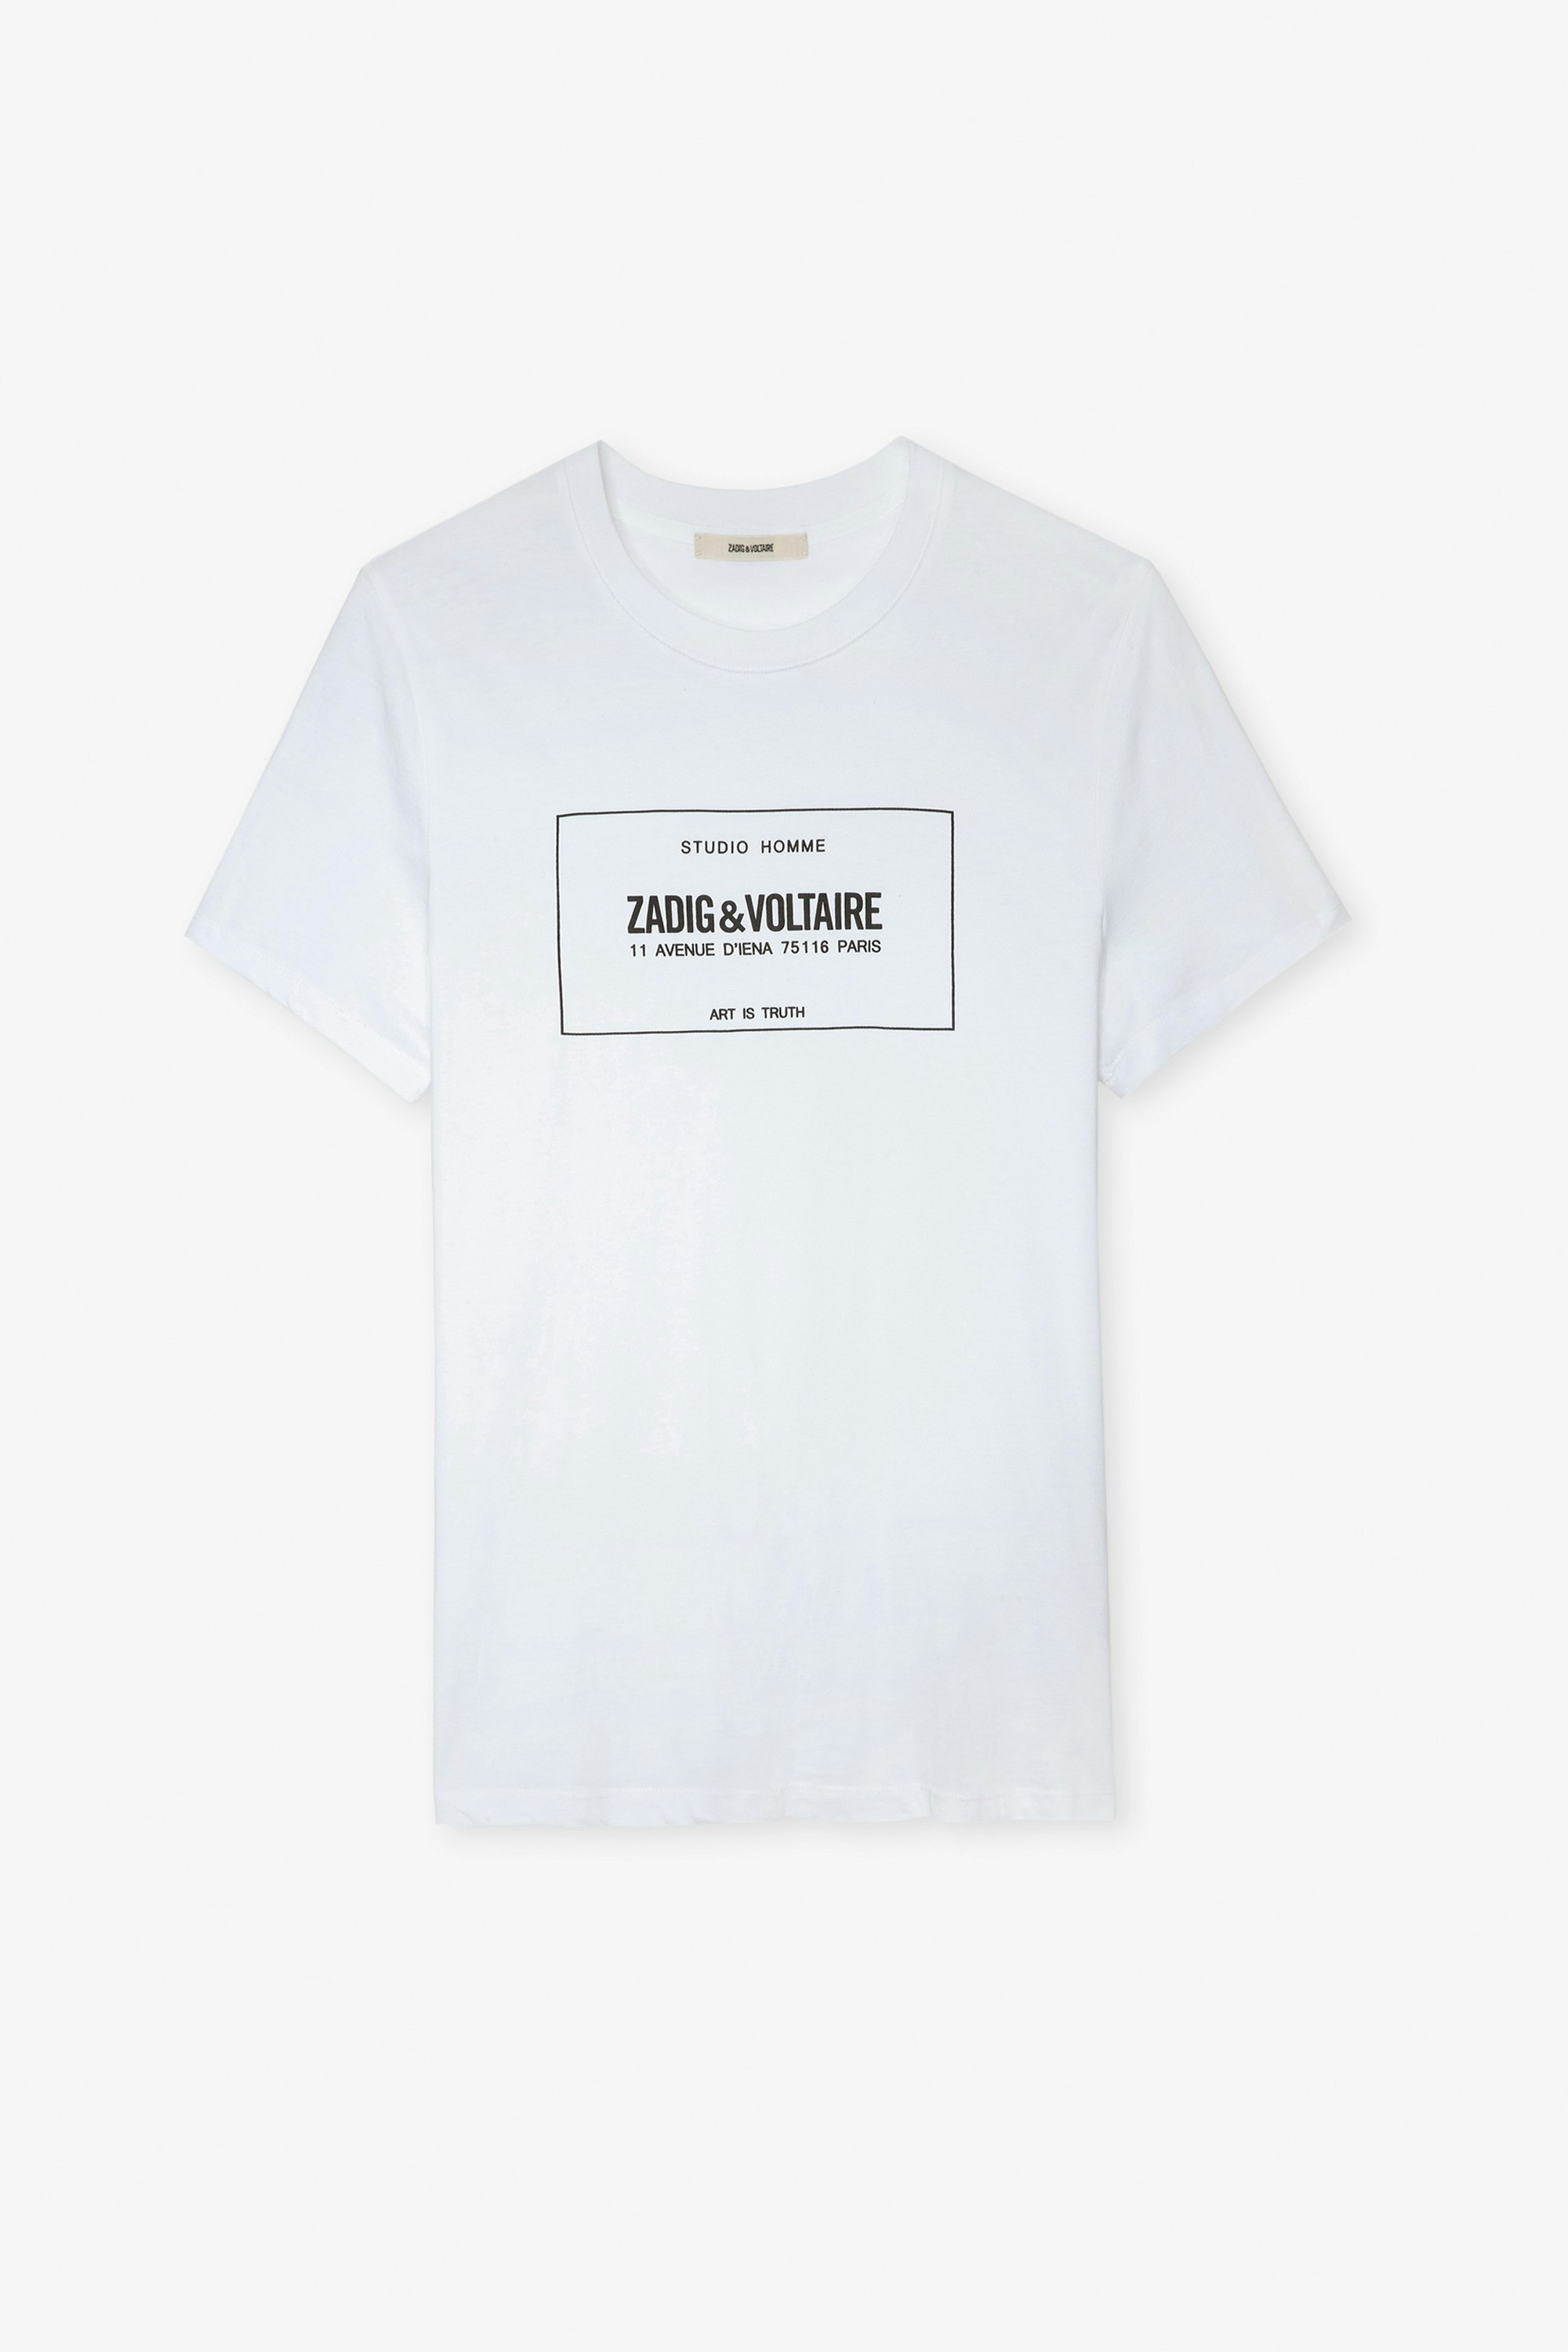 Ted T-Shirt - Men’s white cotton T-shirt with brand insignia